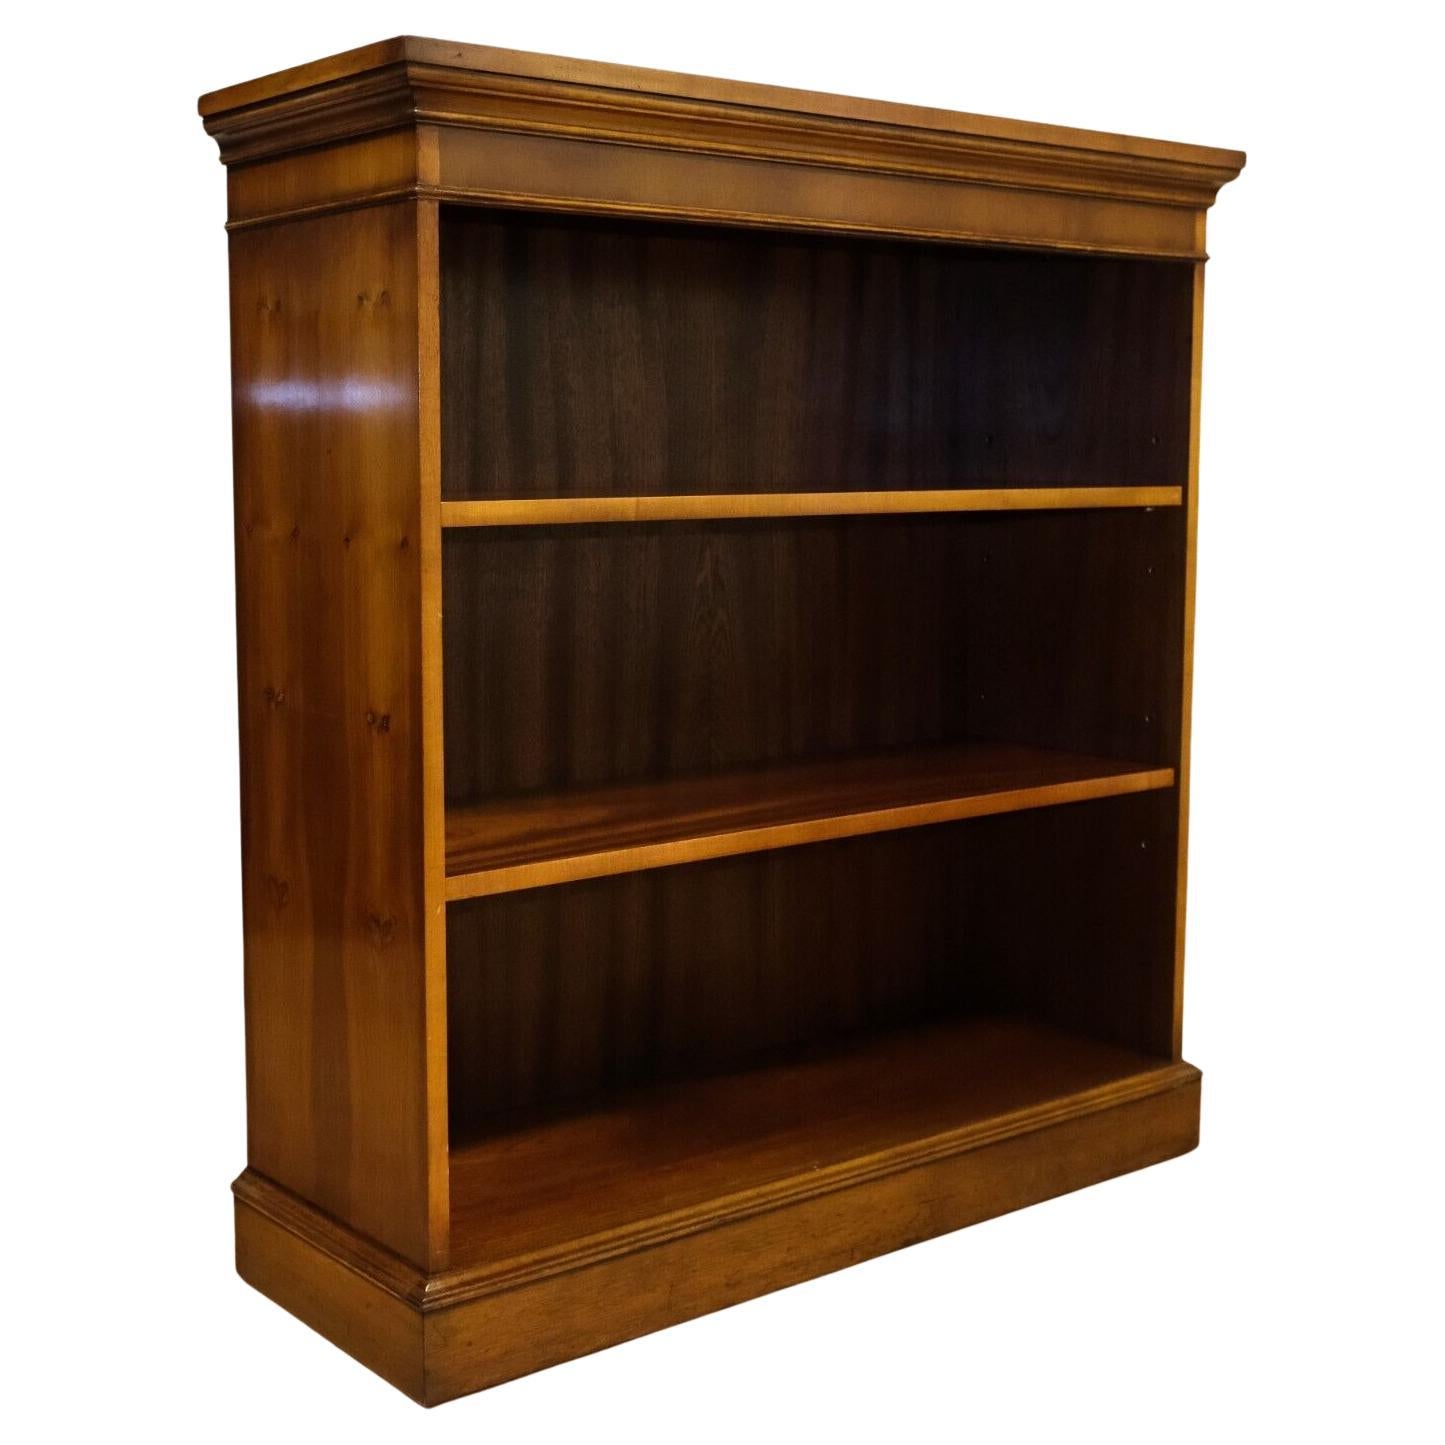 BEAUTIFUL BRADLEY BURR YEW WOOD LOW OPEN BOOKCASE WiTH PAIR ADJUSTABLE SHELVES For Sale